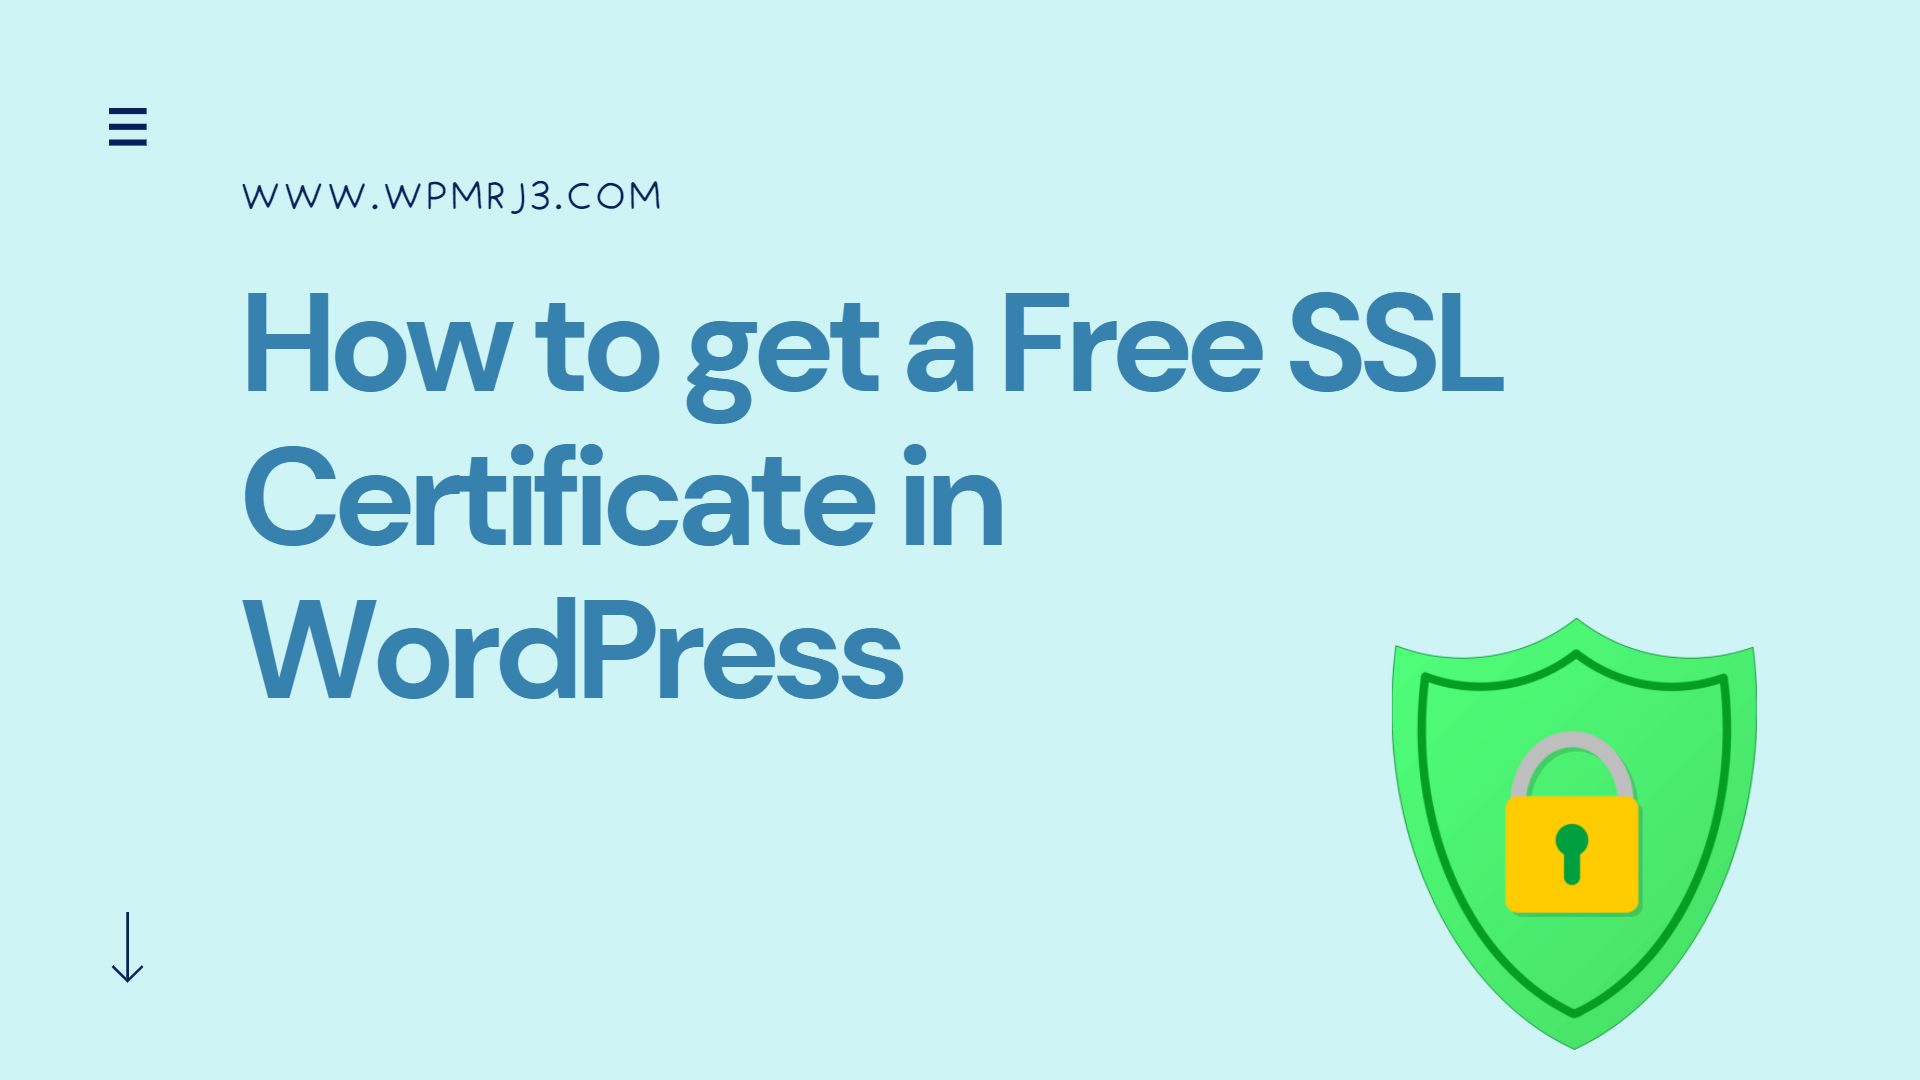  How to get a Free SSL Certificate in WordPress 